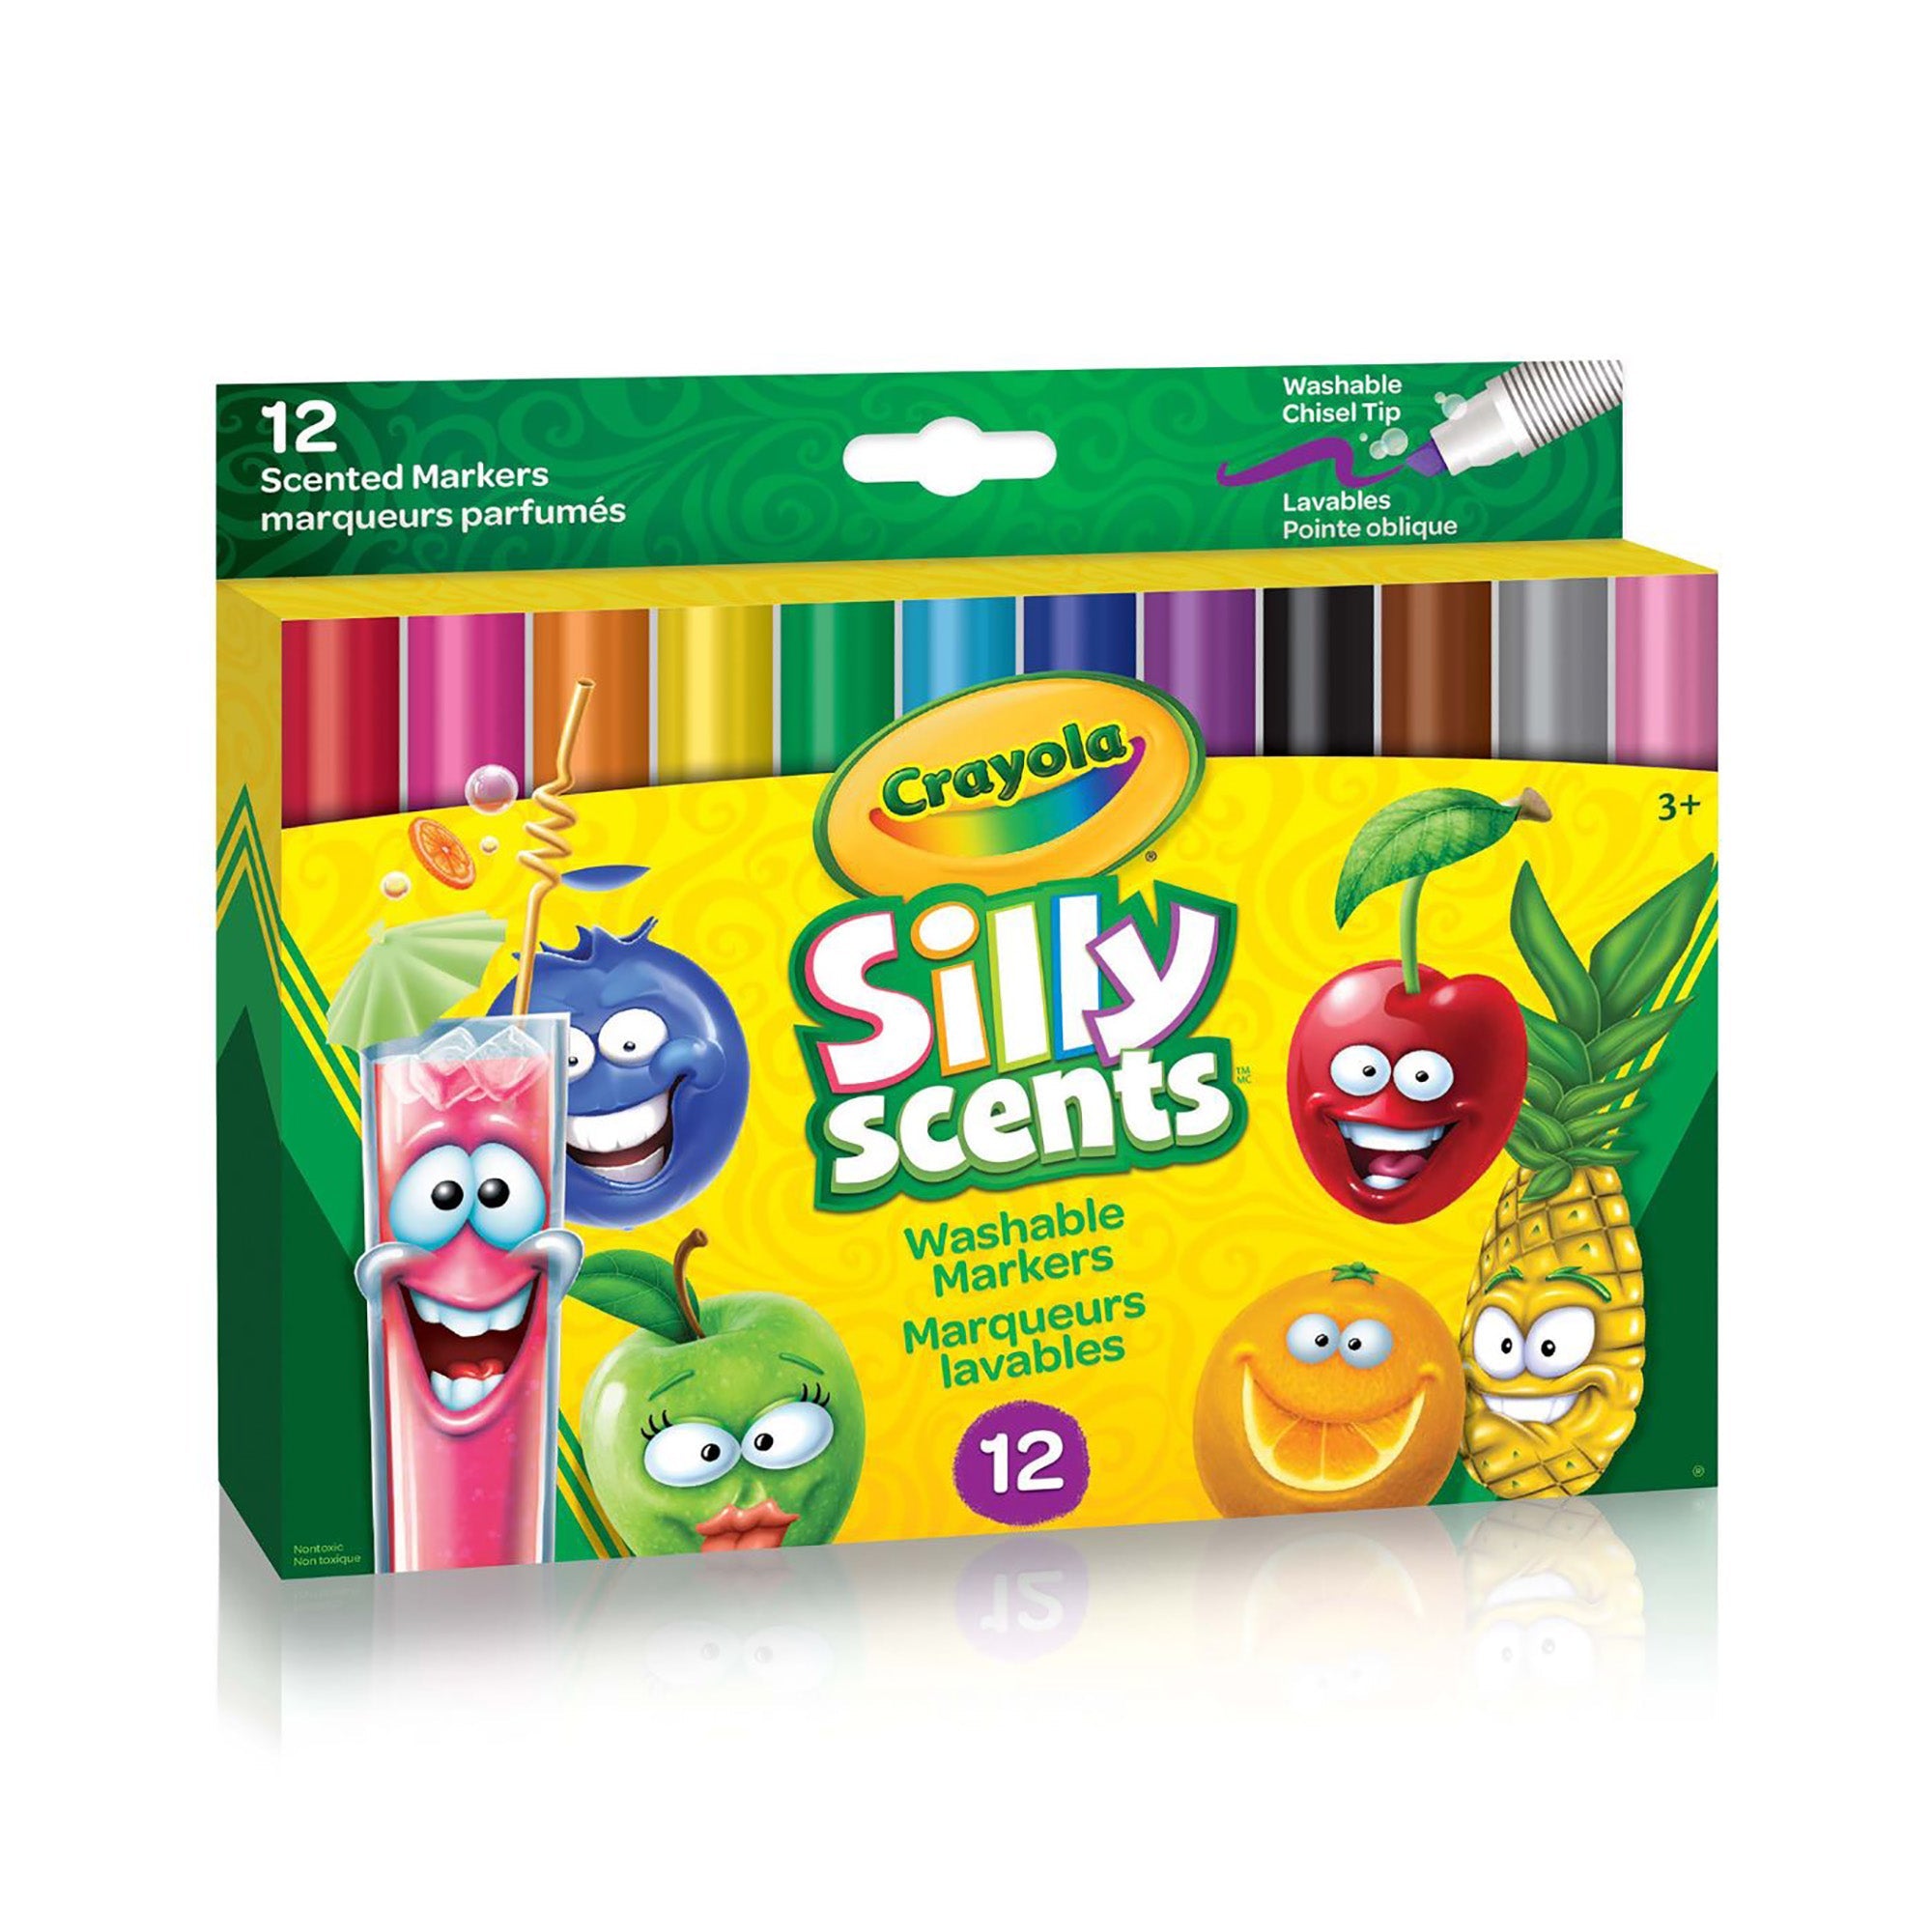 Crayola Silly Scents 12 Markers - Chisel Tip - Washable